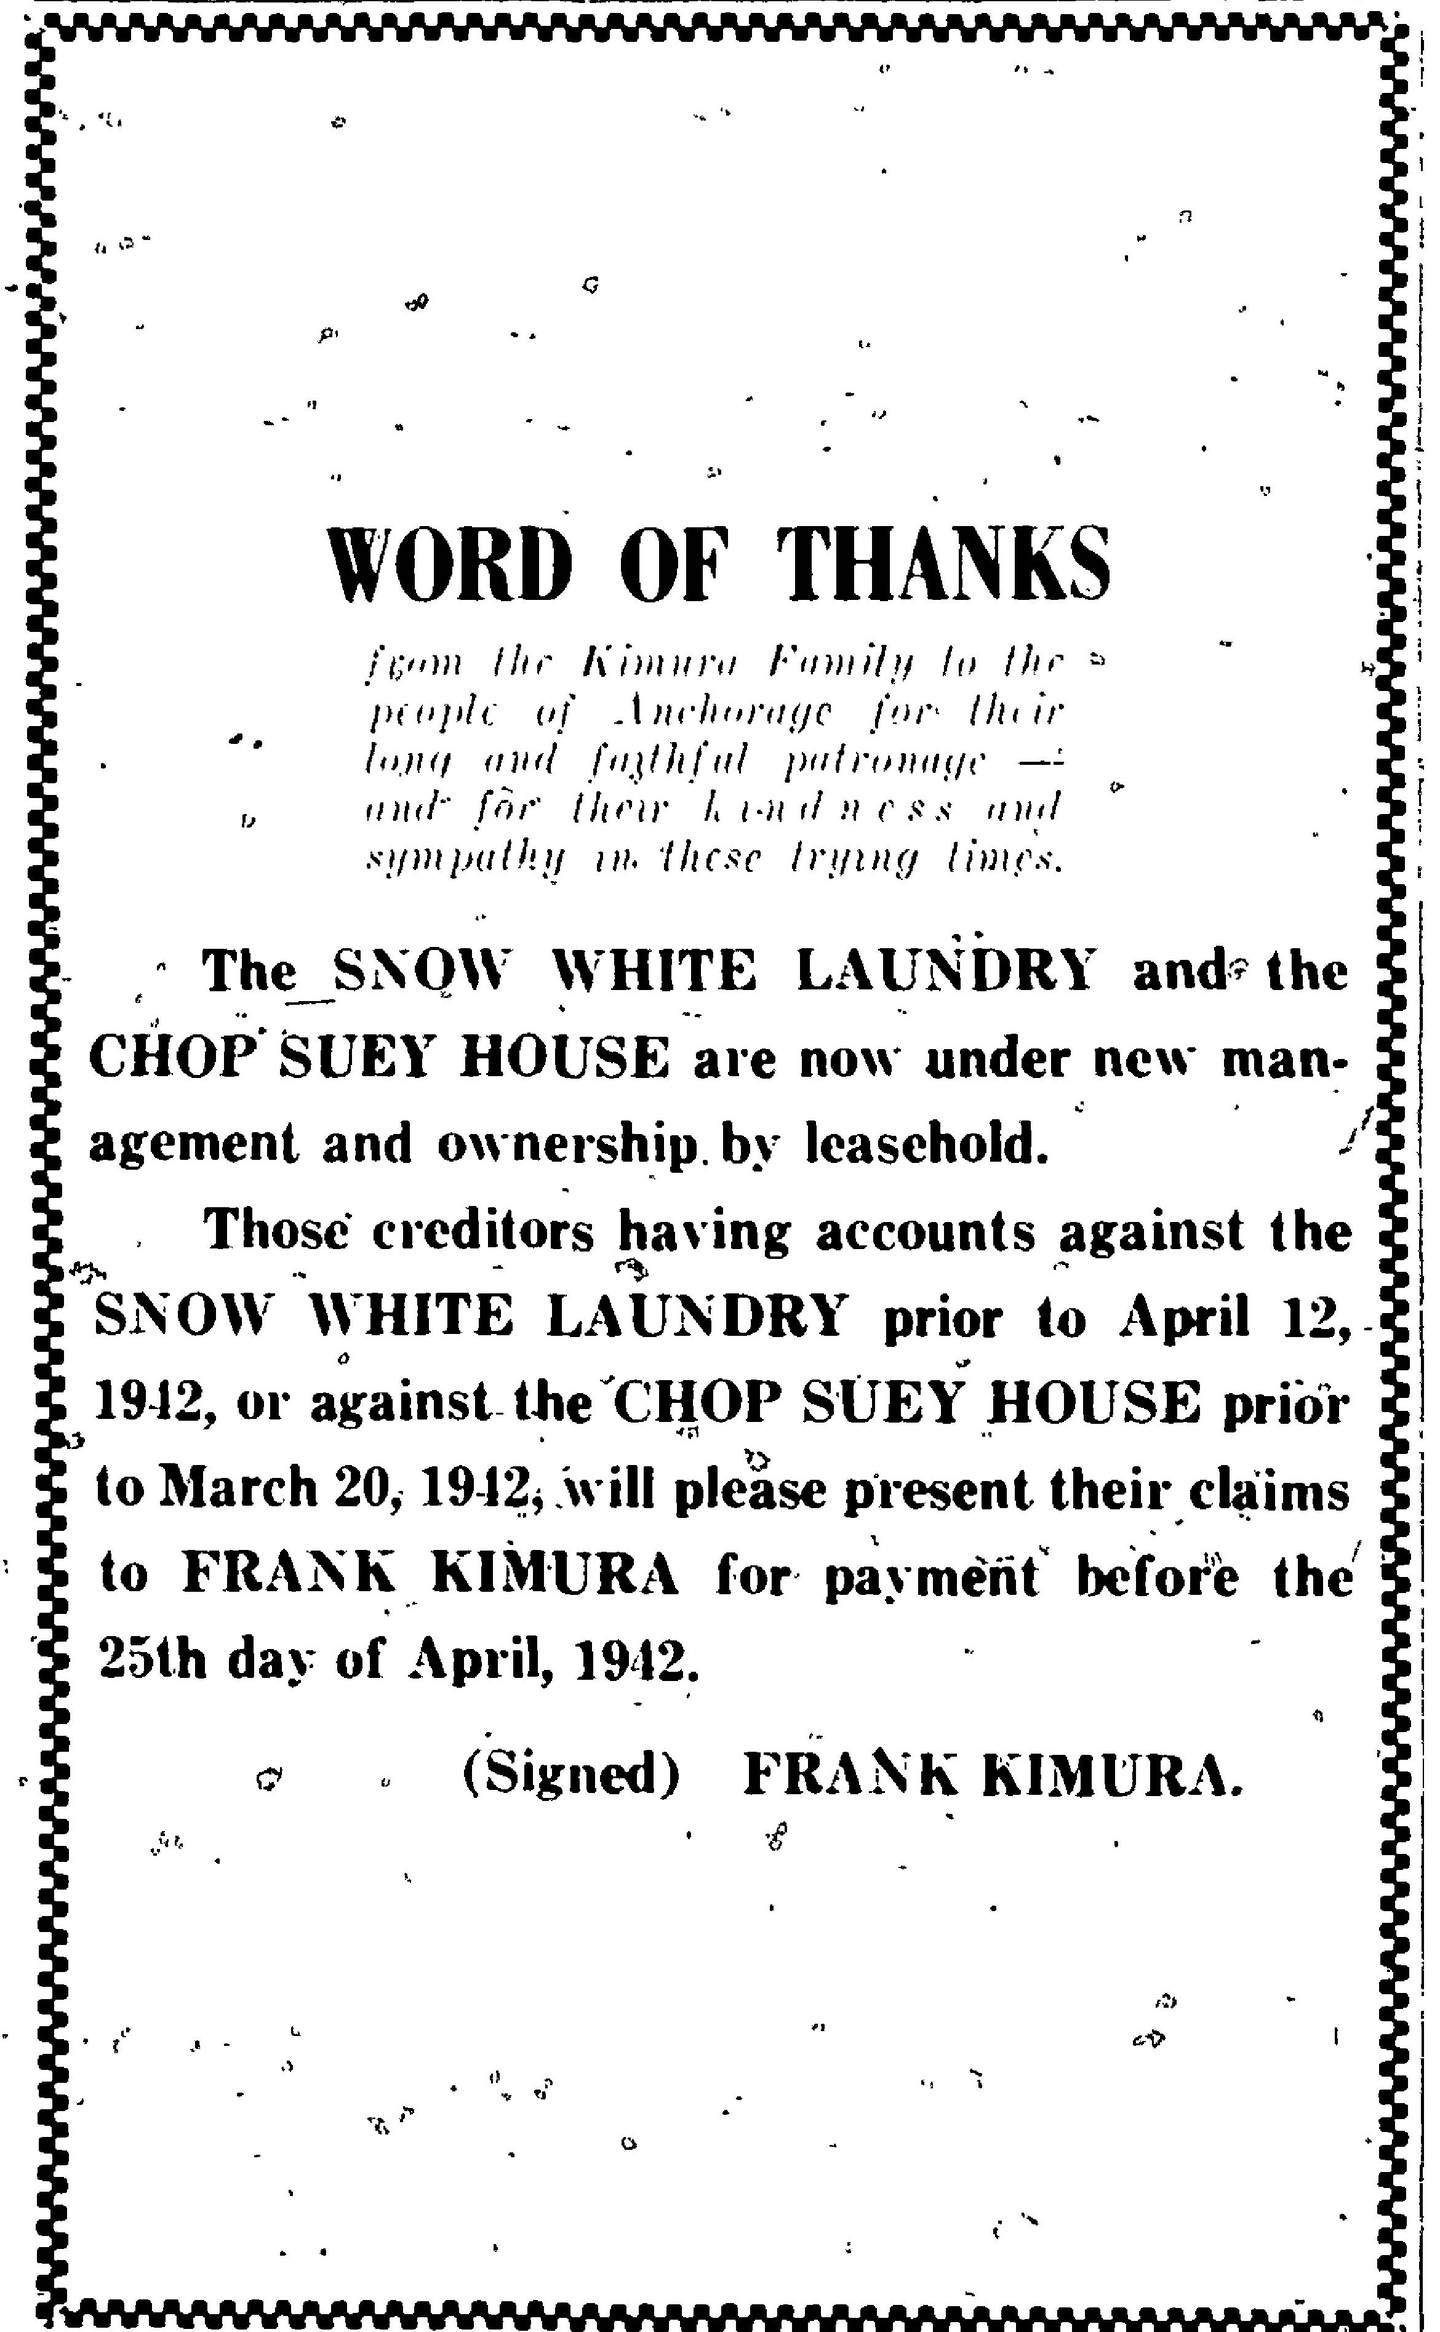 A thank you letter from Frank Kimura in the form of an advertisement in the April 22, 1942 edition of the Anchorage Daily Times